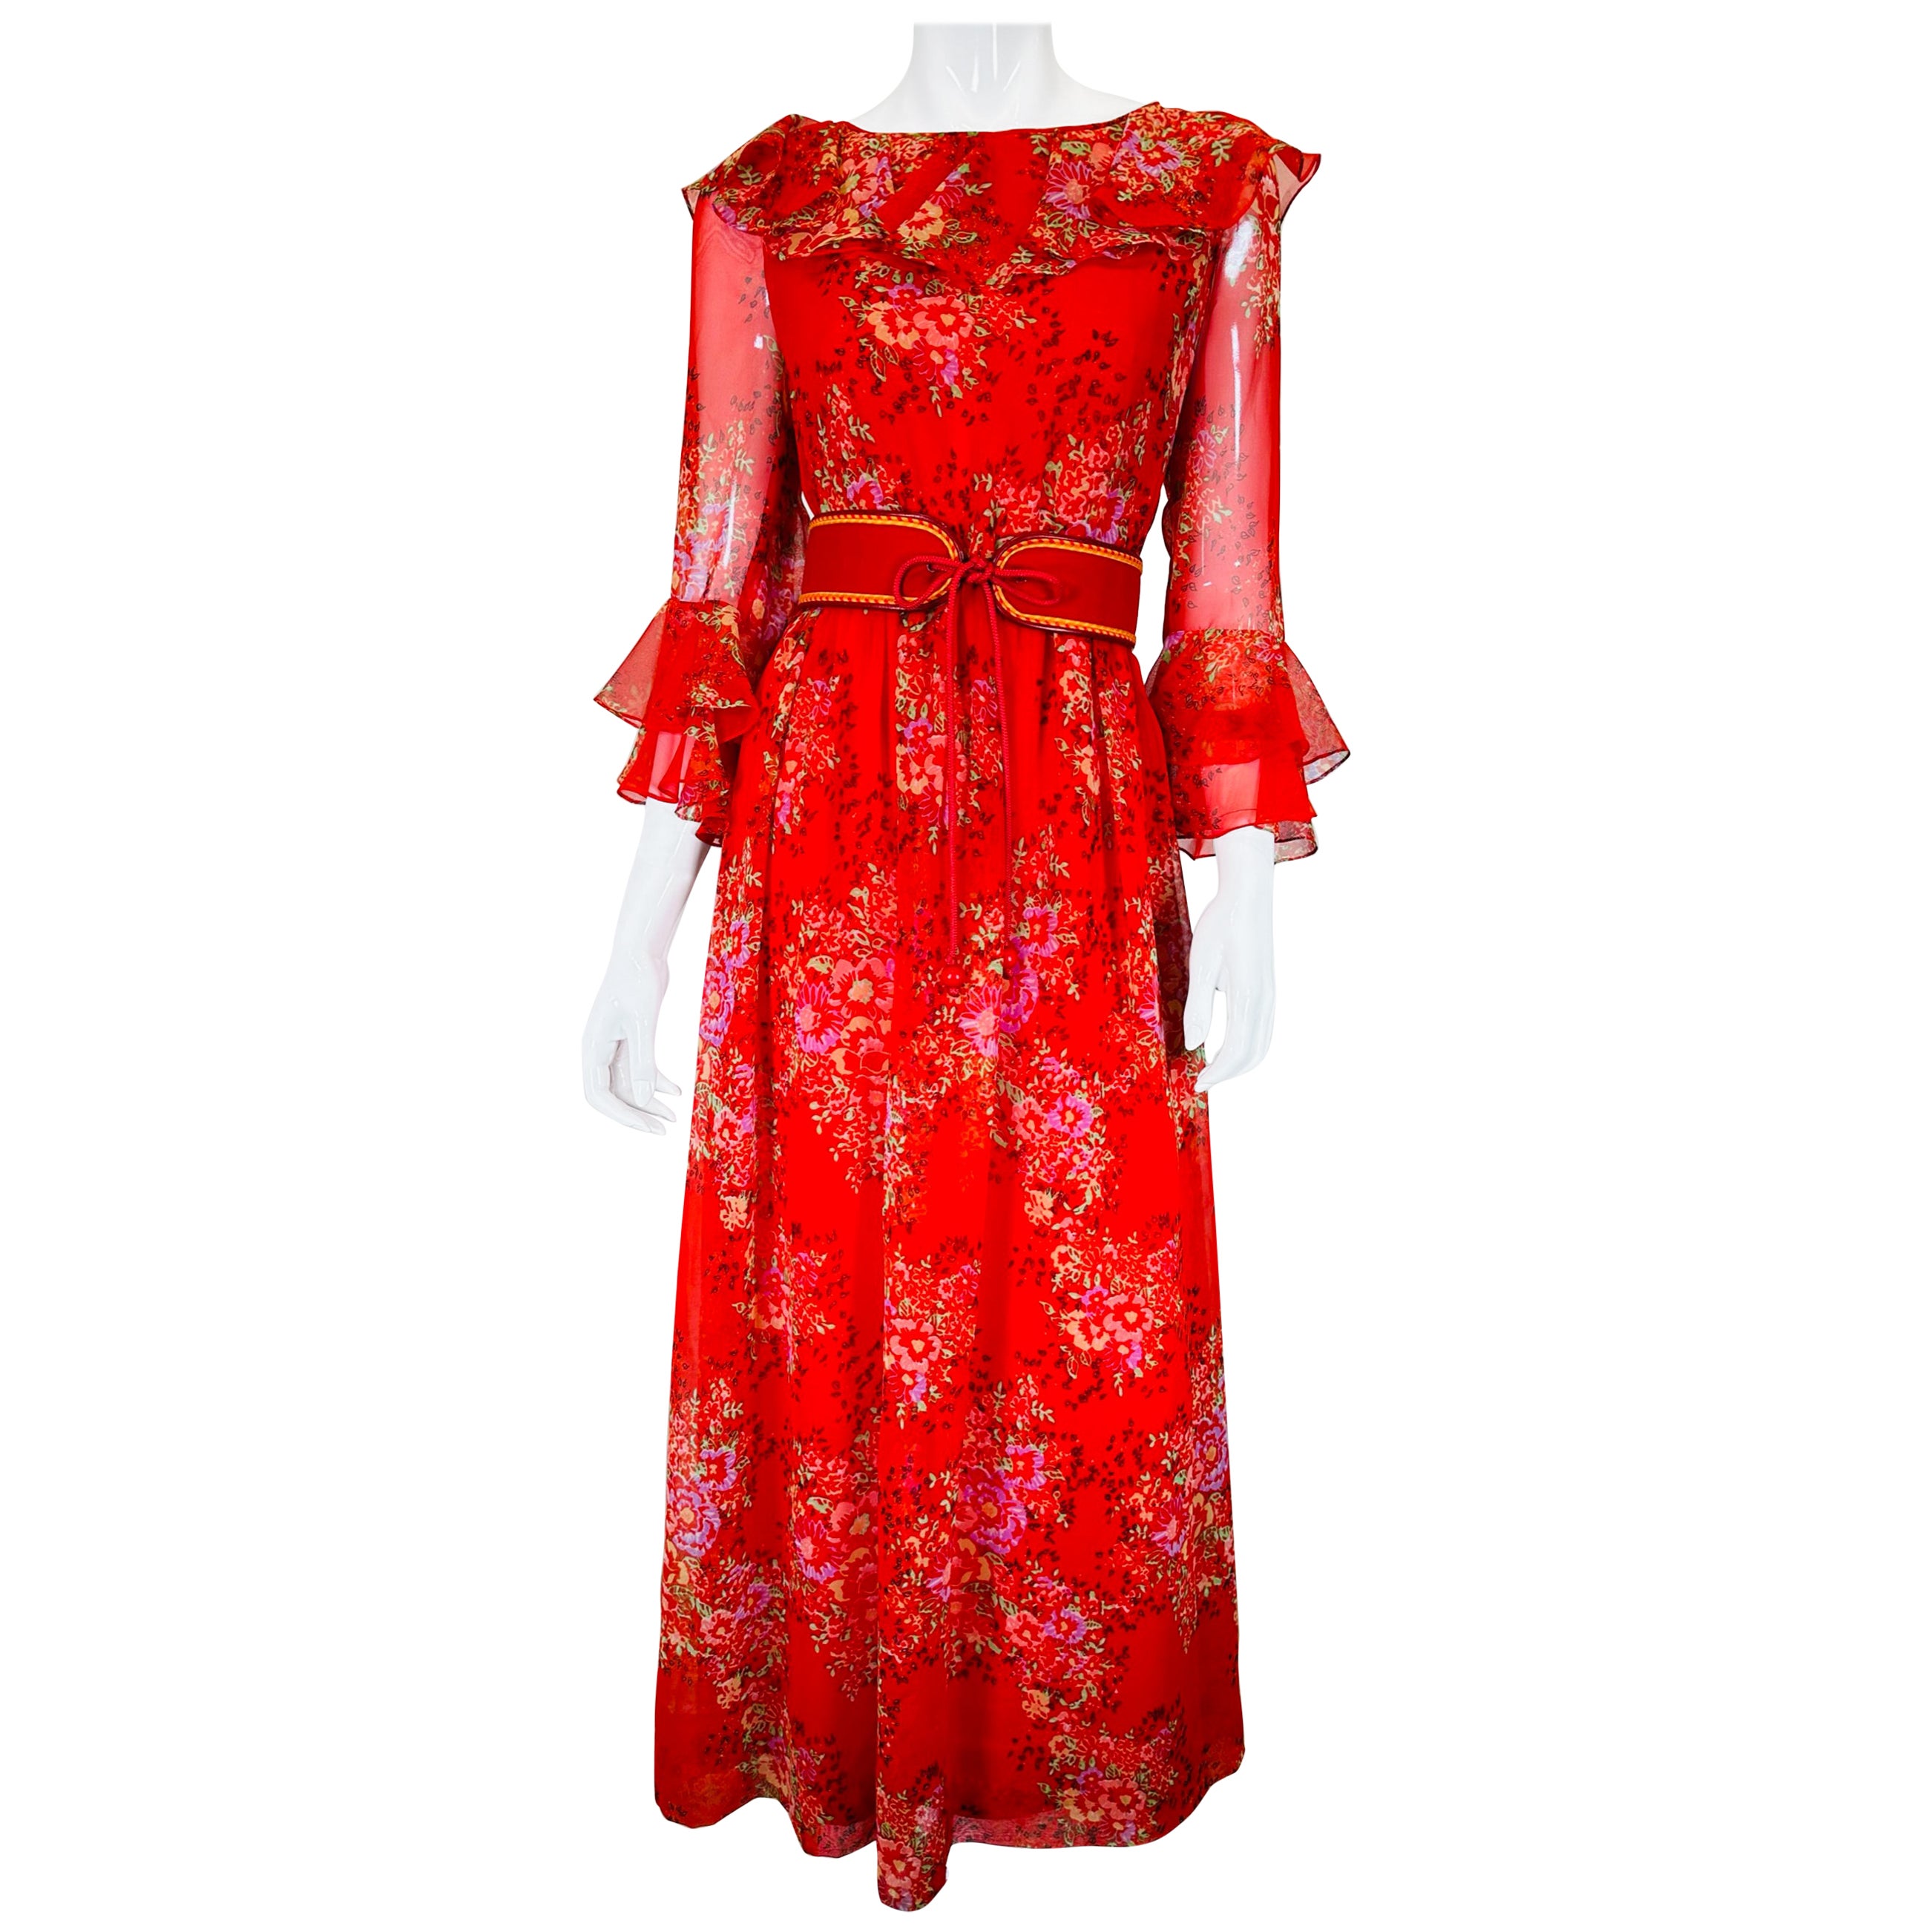 Adele Simpson Red Floral Chiffon Ruffle Neckline Maxi Dress From the 1970s For Sale